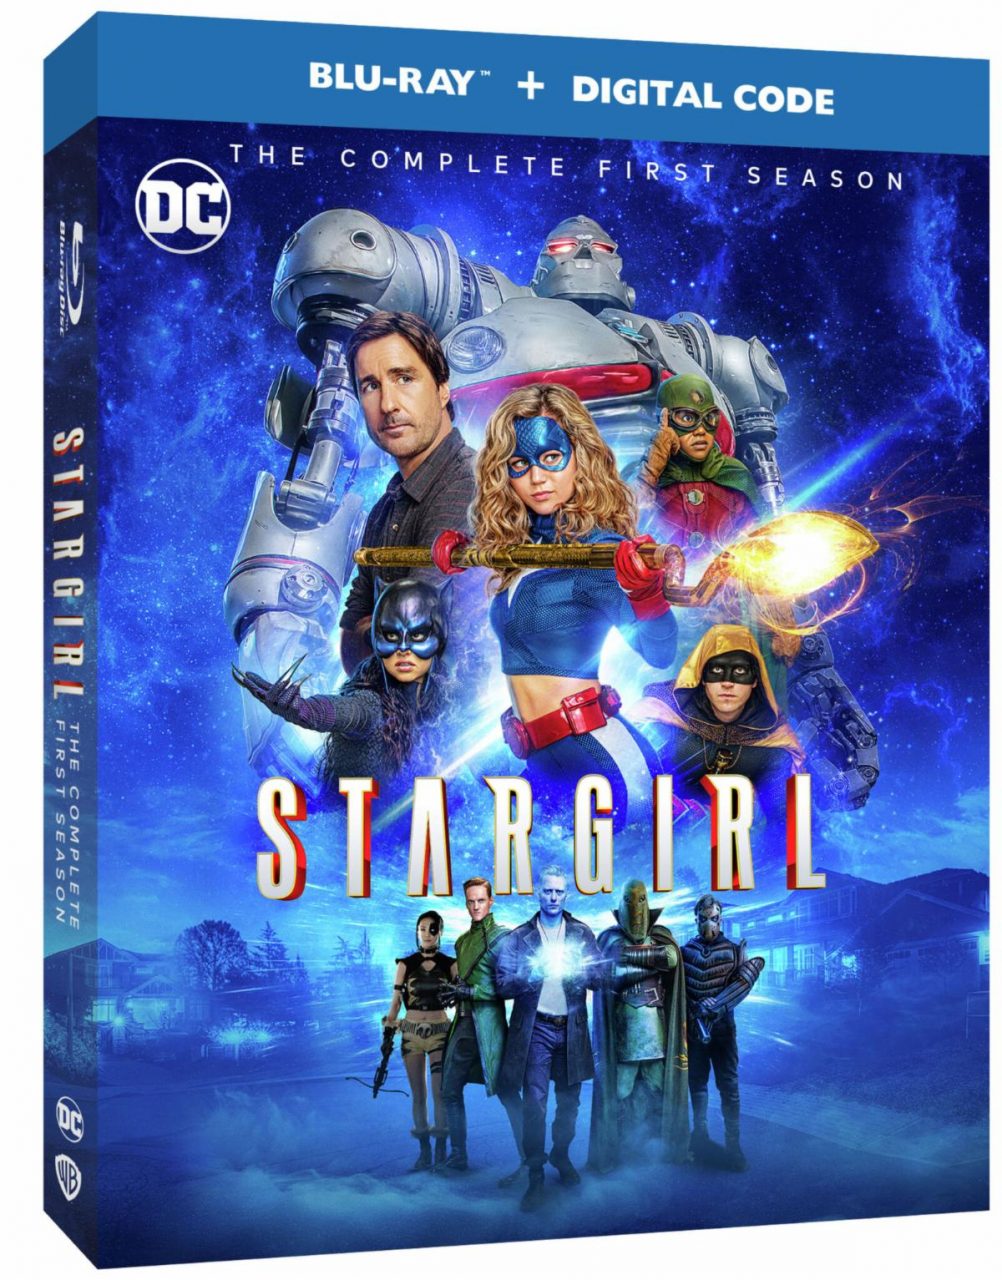 DC's Stargirl: The Complete First Season Blu-Ray Combo Pack cover (Warner Bros. Home Entertainment)